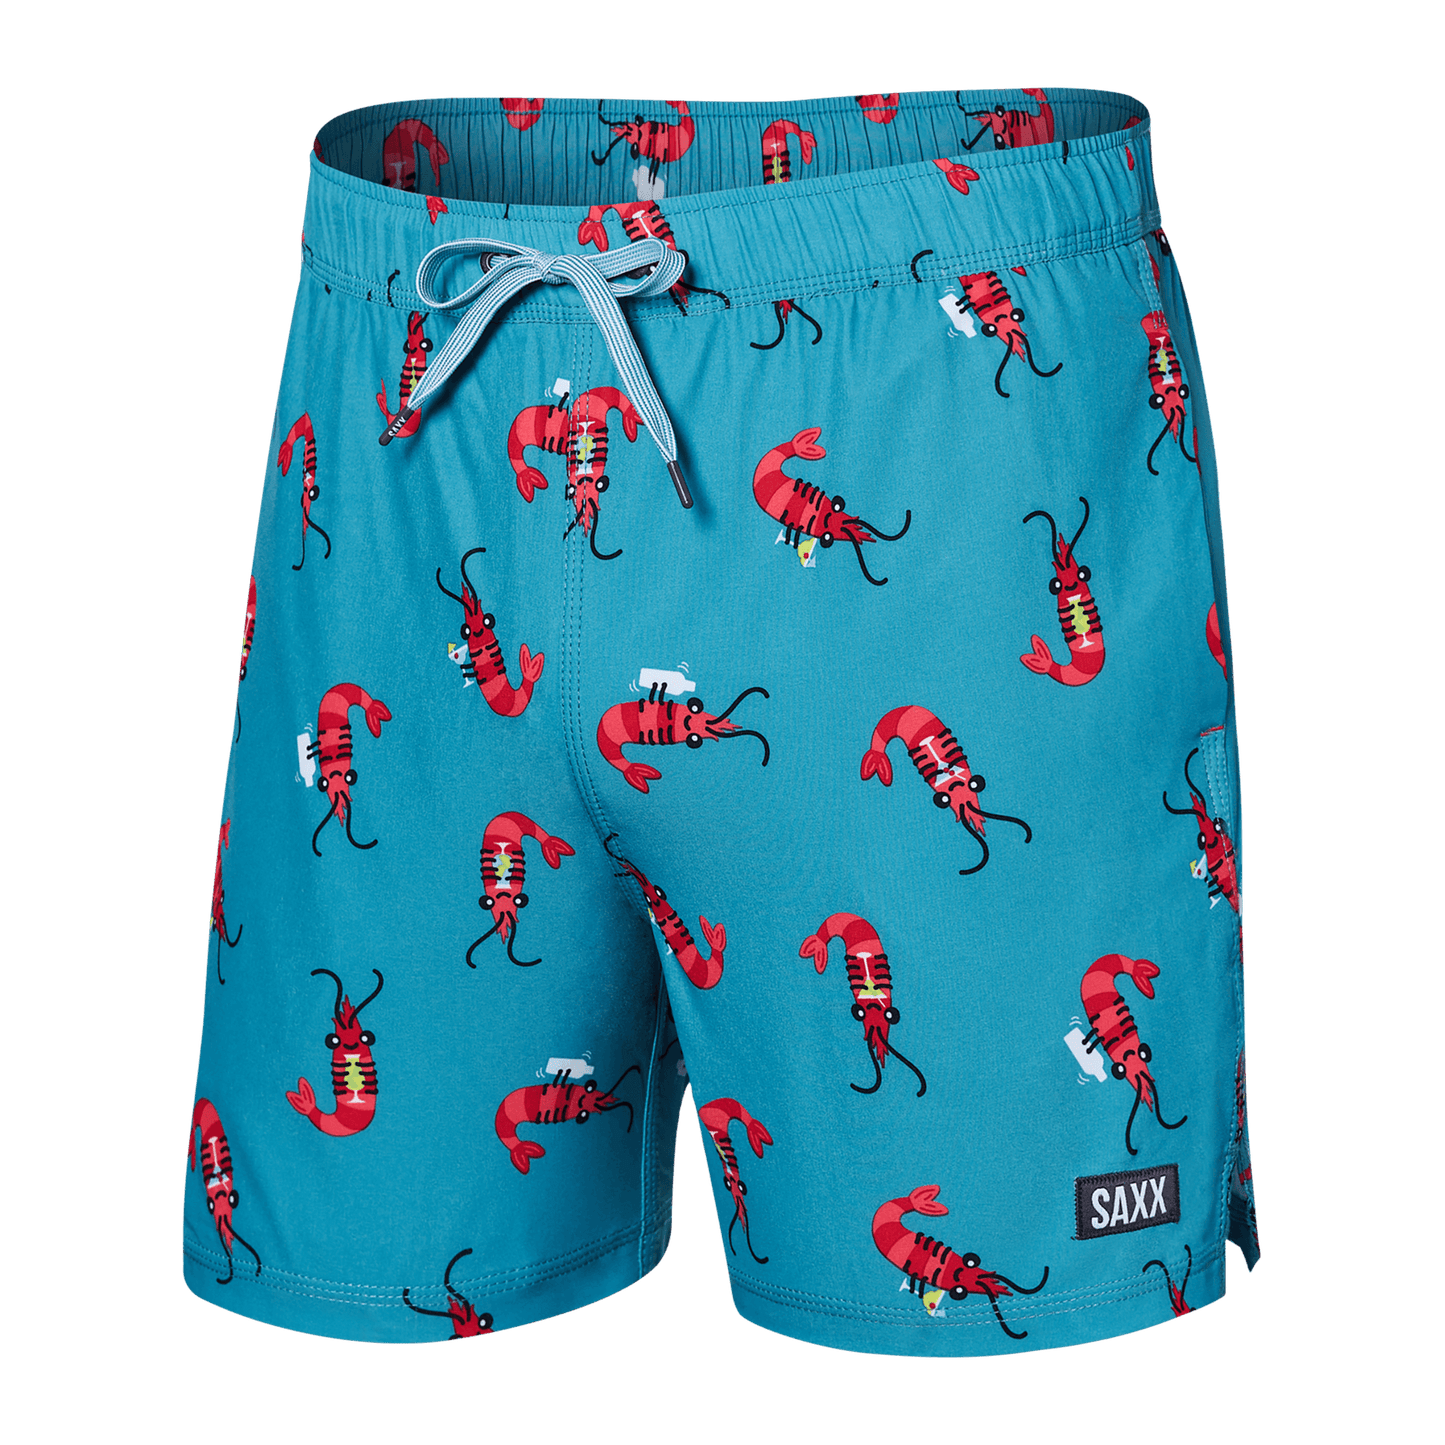 Oh Buoy 5" Swim Shorts with Compression Liner - Shrimp Cocktail (Blue Moon)